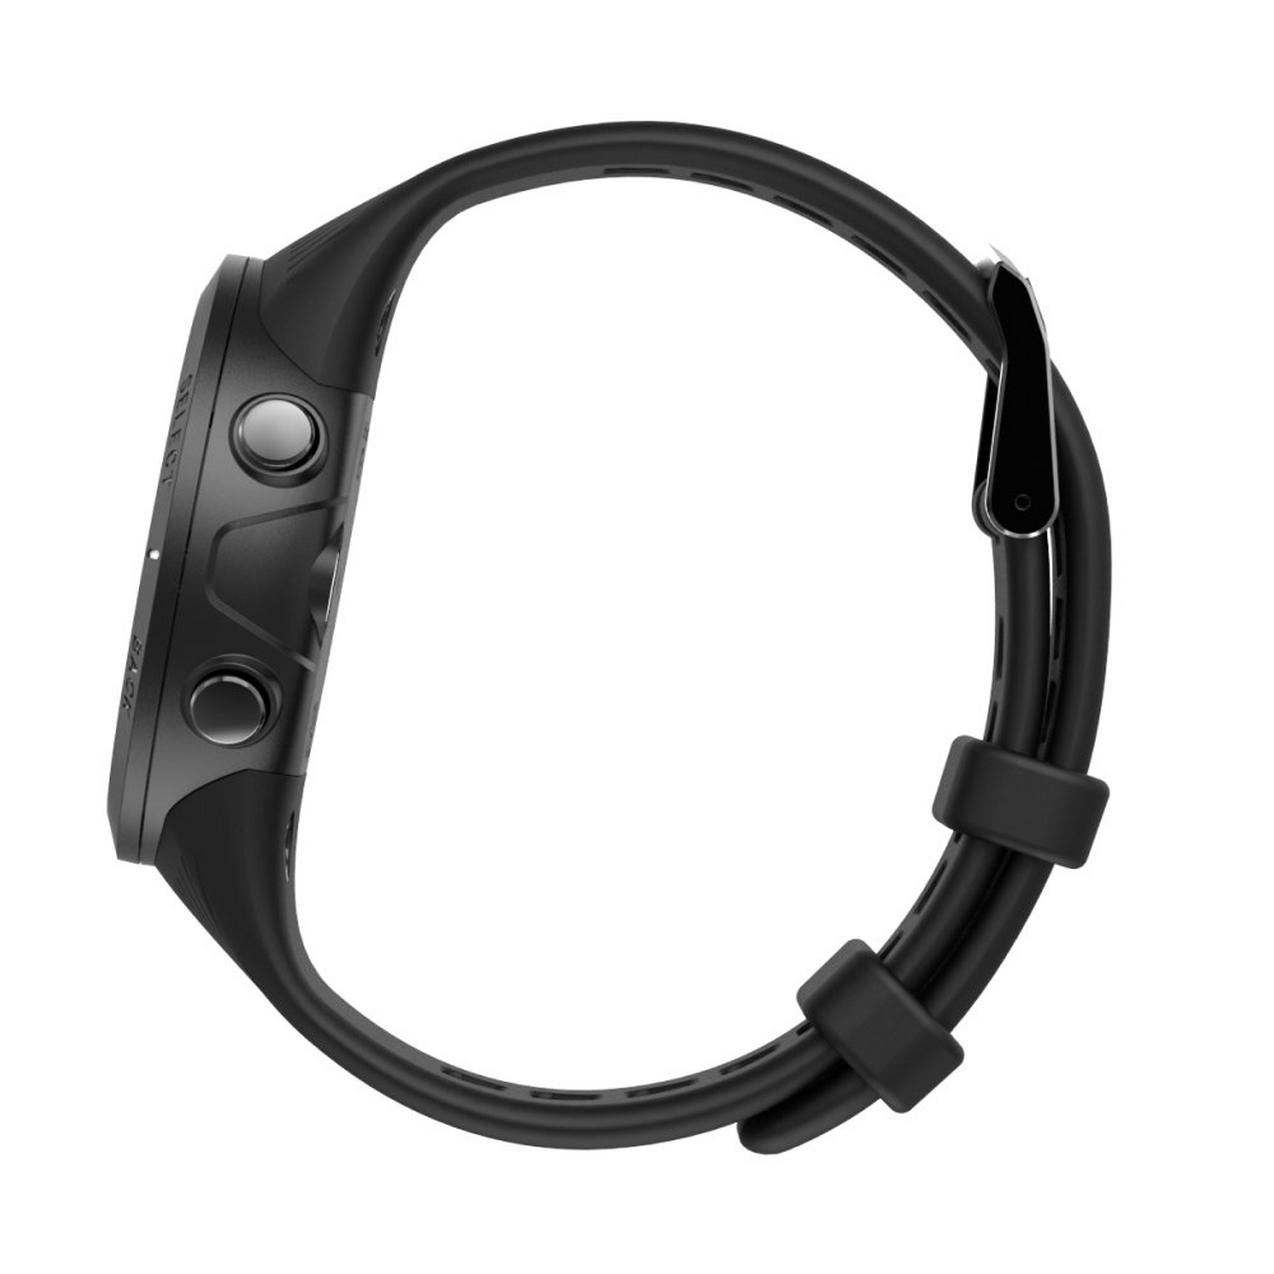 V5 GPS Watch and Performance Tracking